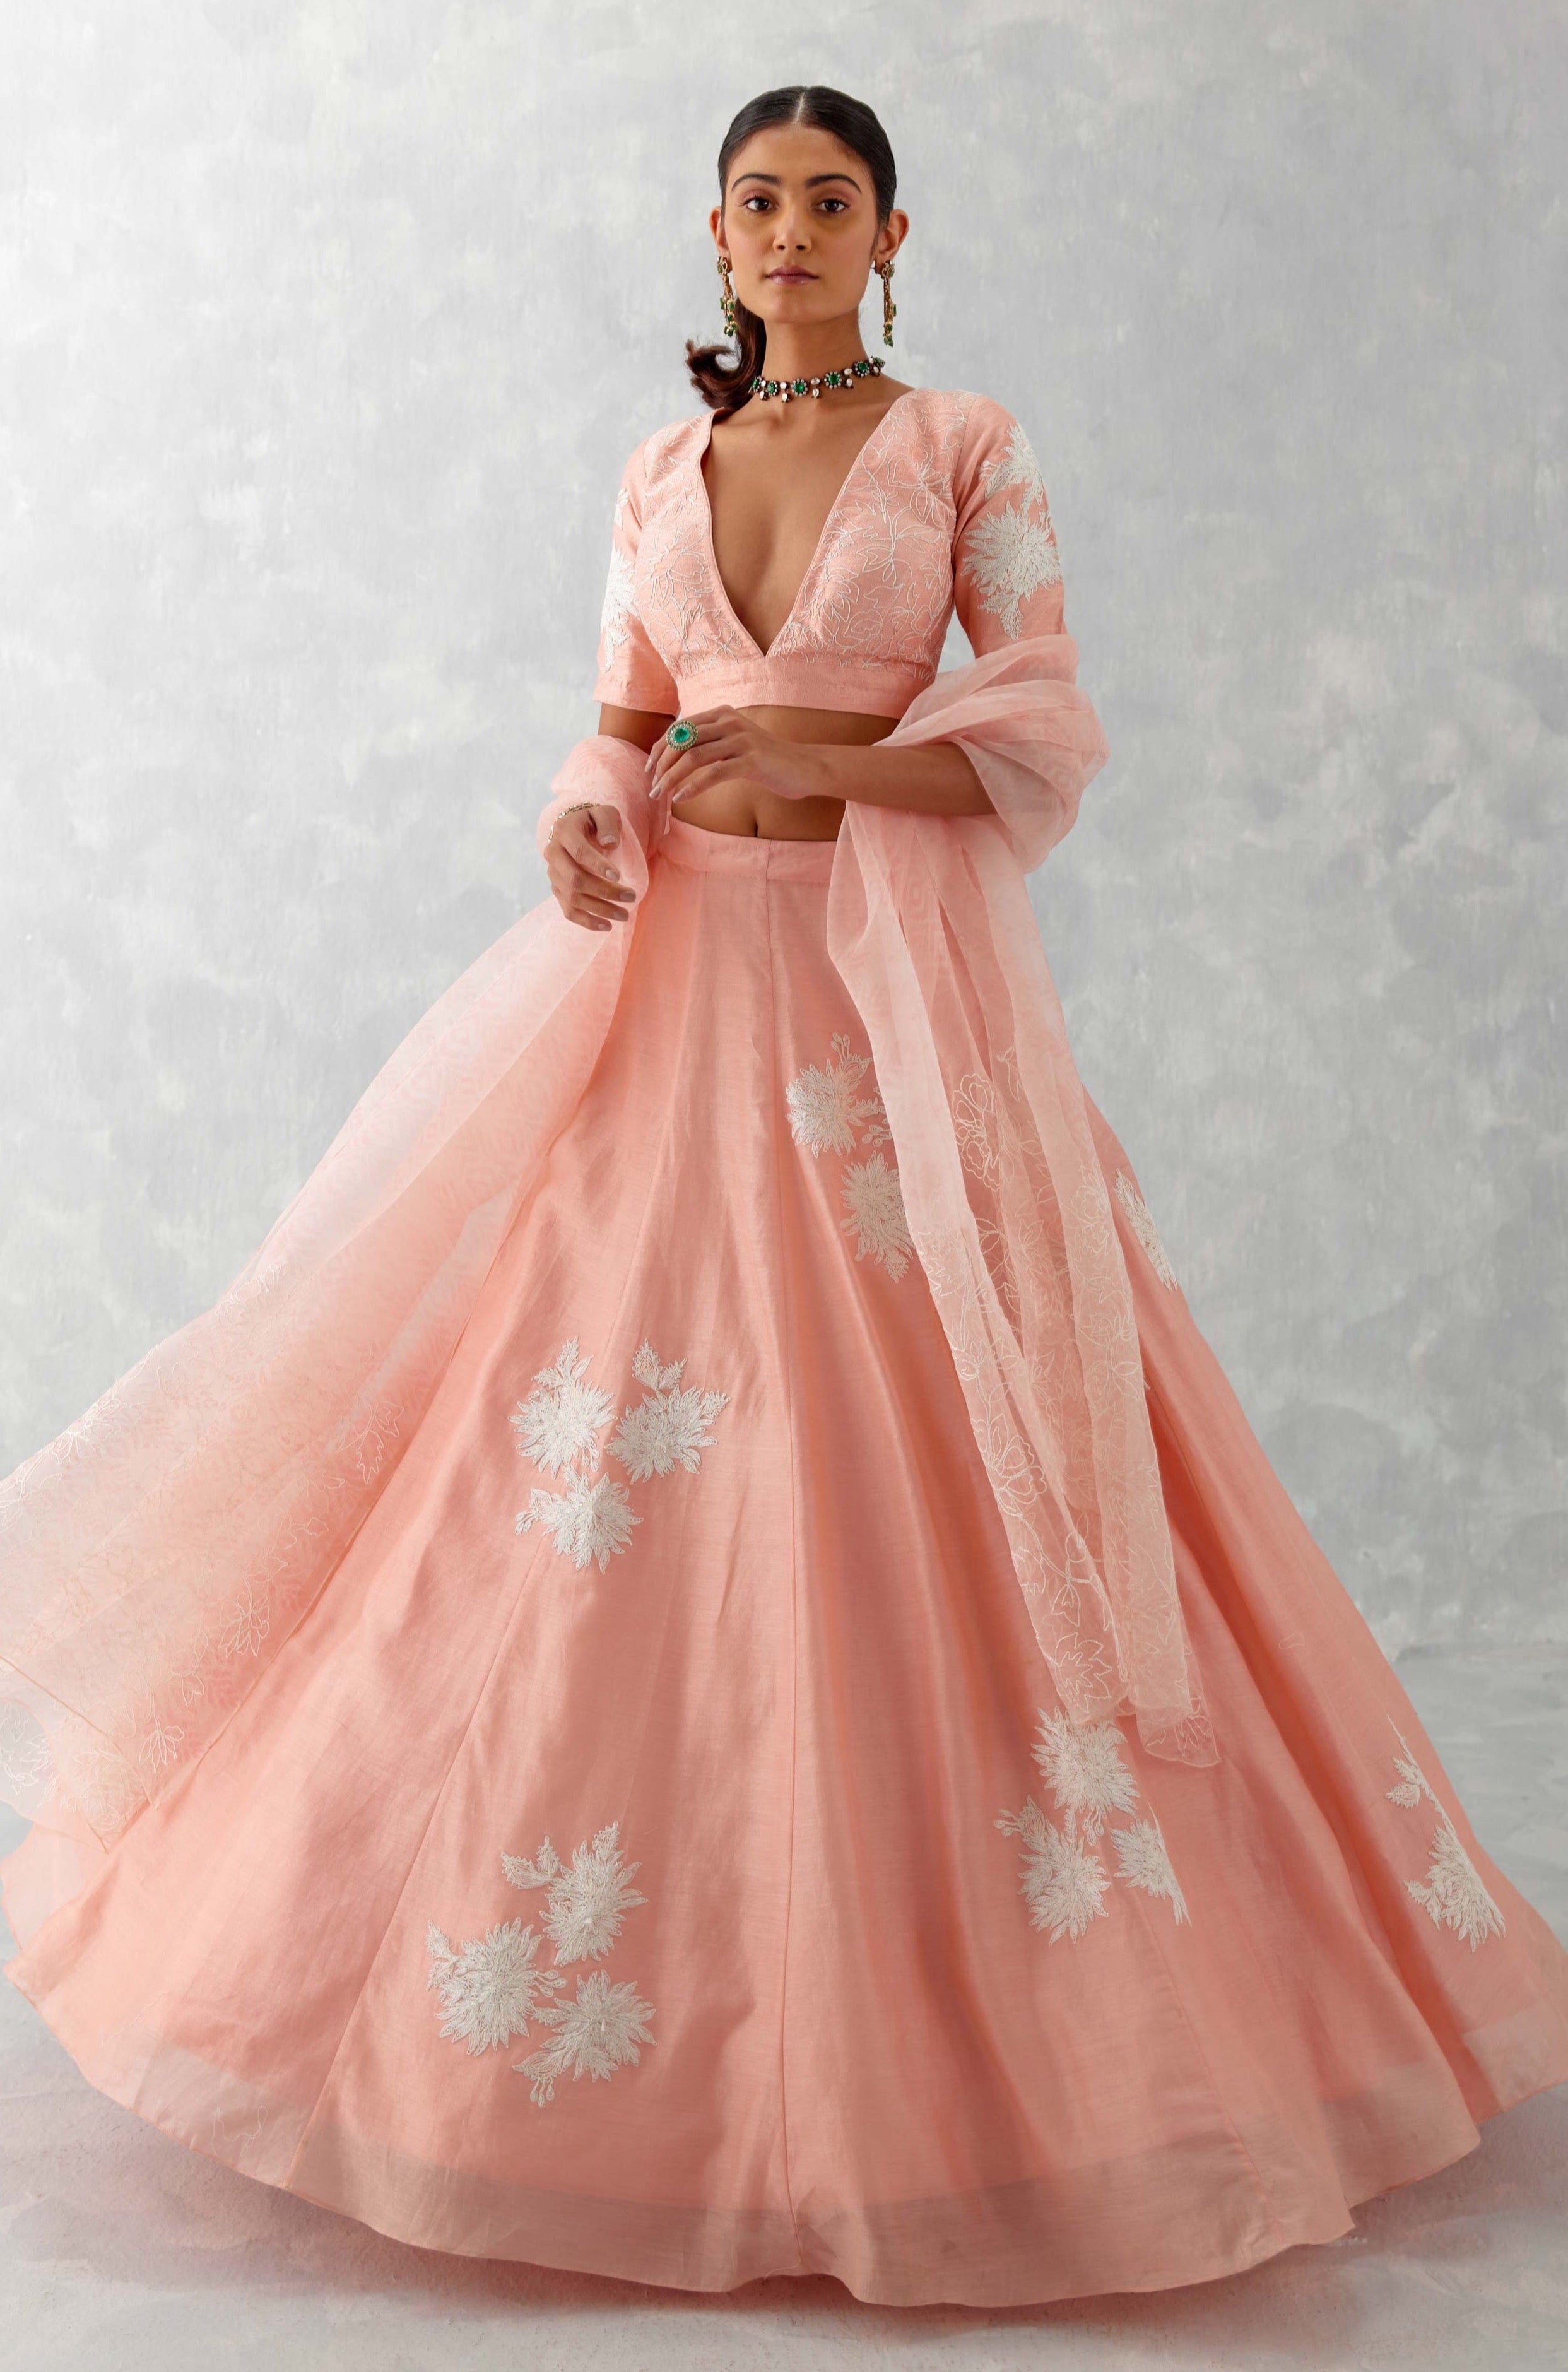 Kateprom Long Sleeve Prom Dresses Pearl Pink Ball Gown Long Floral Fai   kateprom